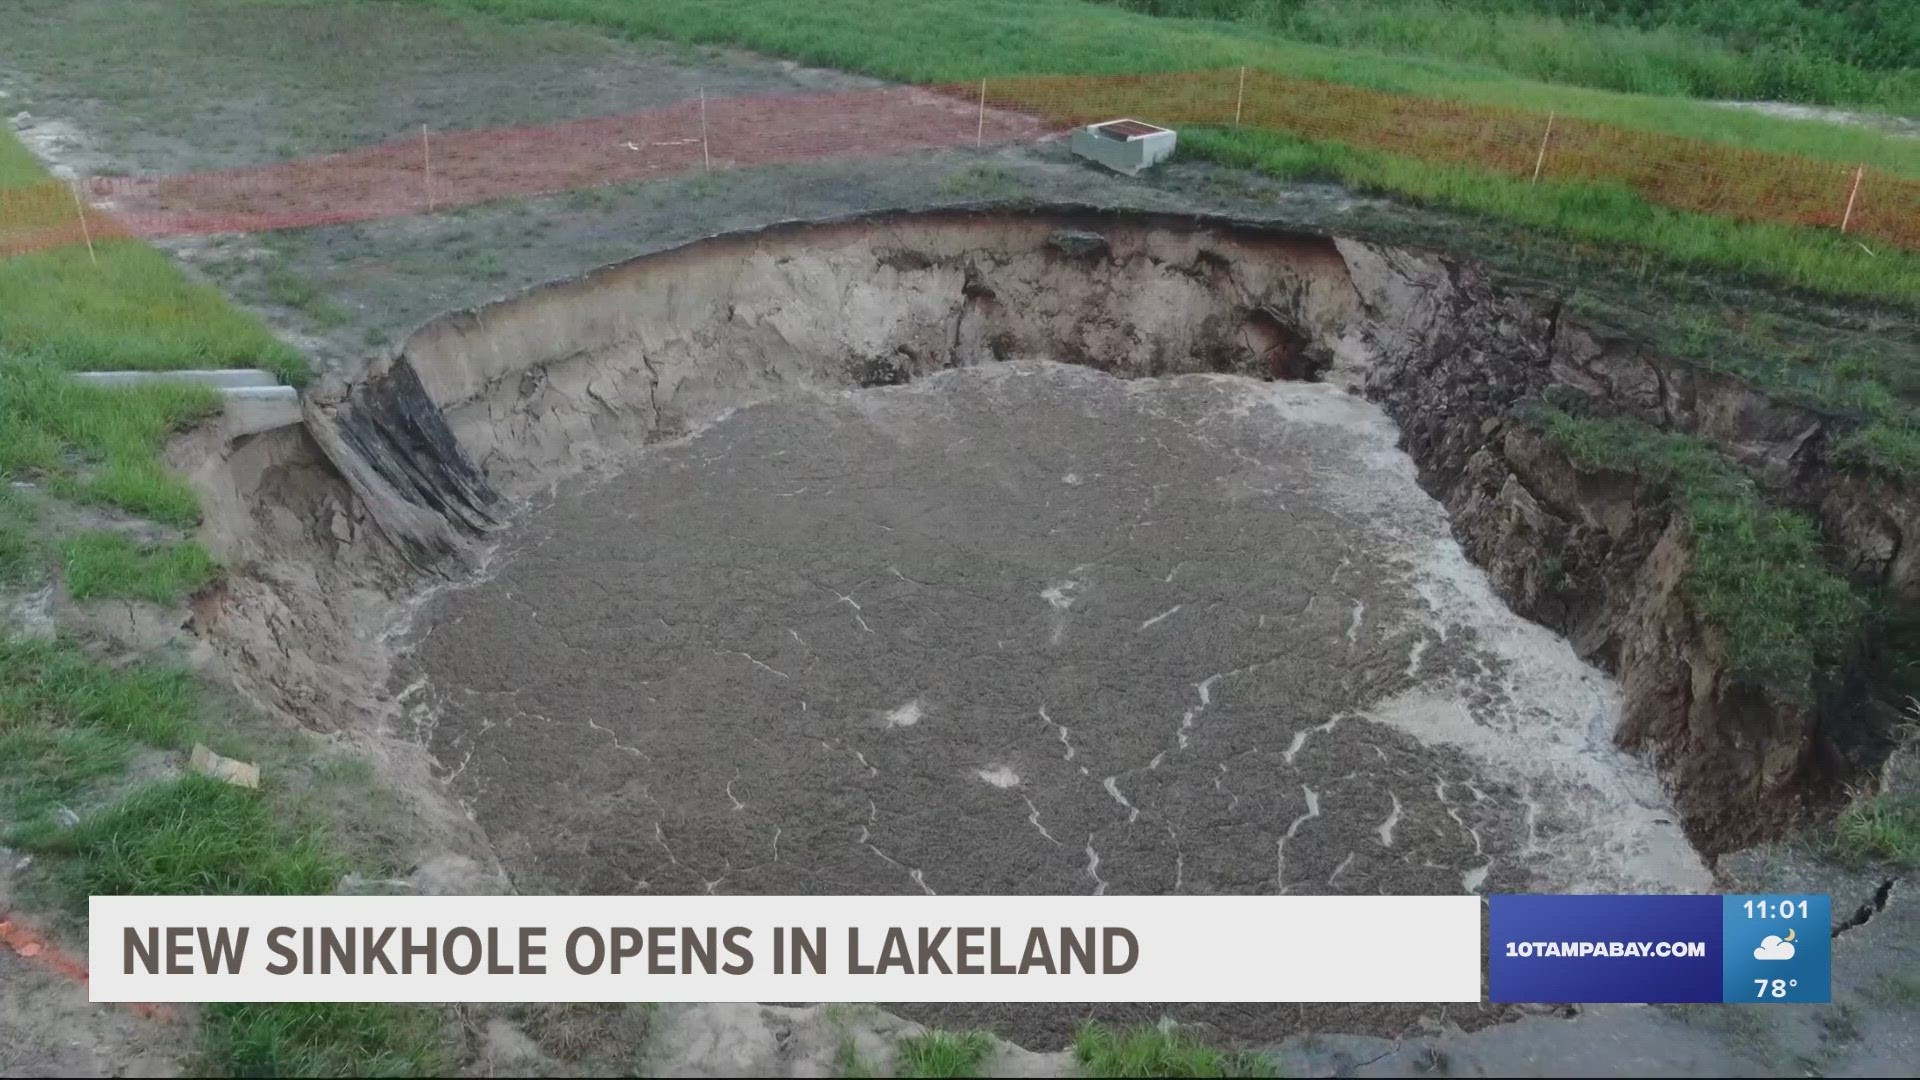 Authorities told 10 Tampa Bay that a private engineer has been brought in by the landowner to take a look at the 12-foot-deep hole.